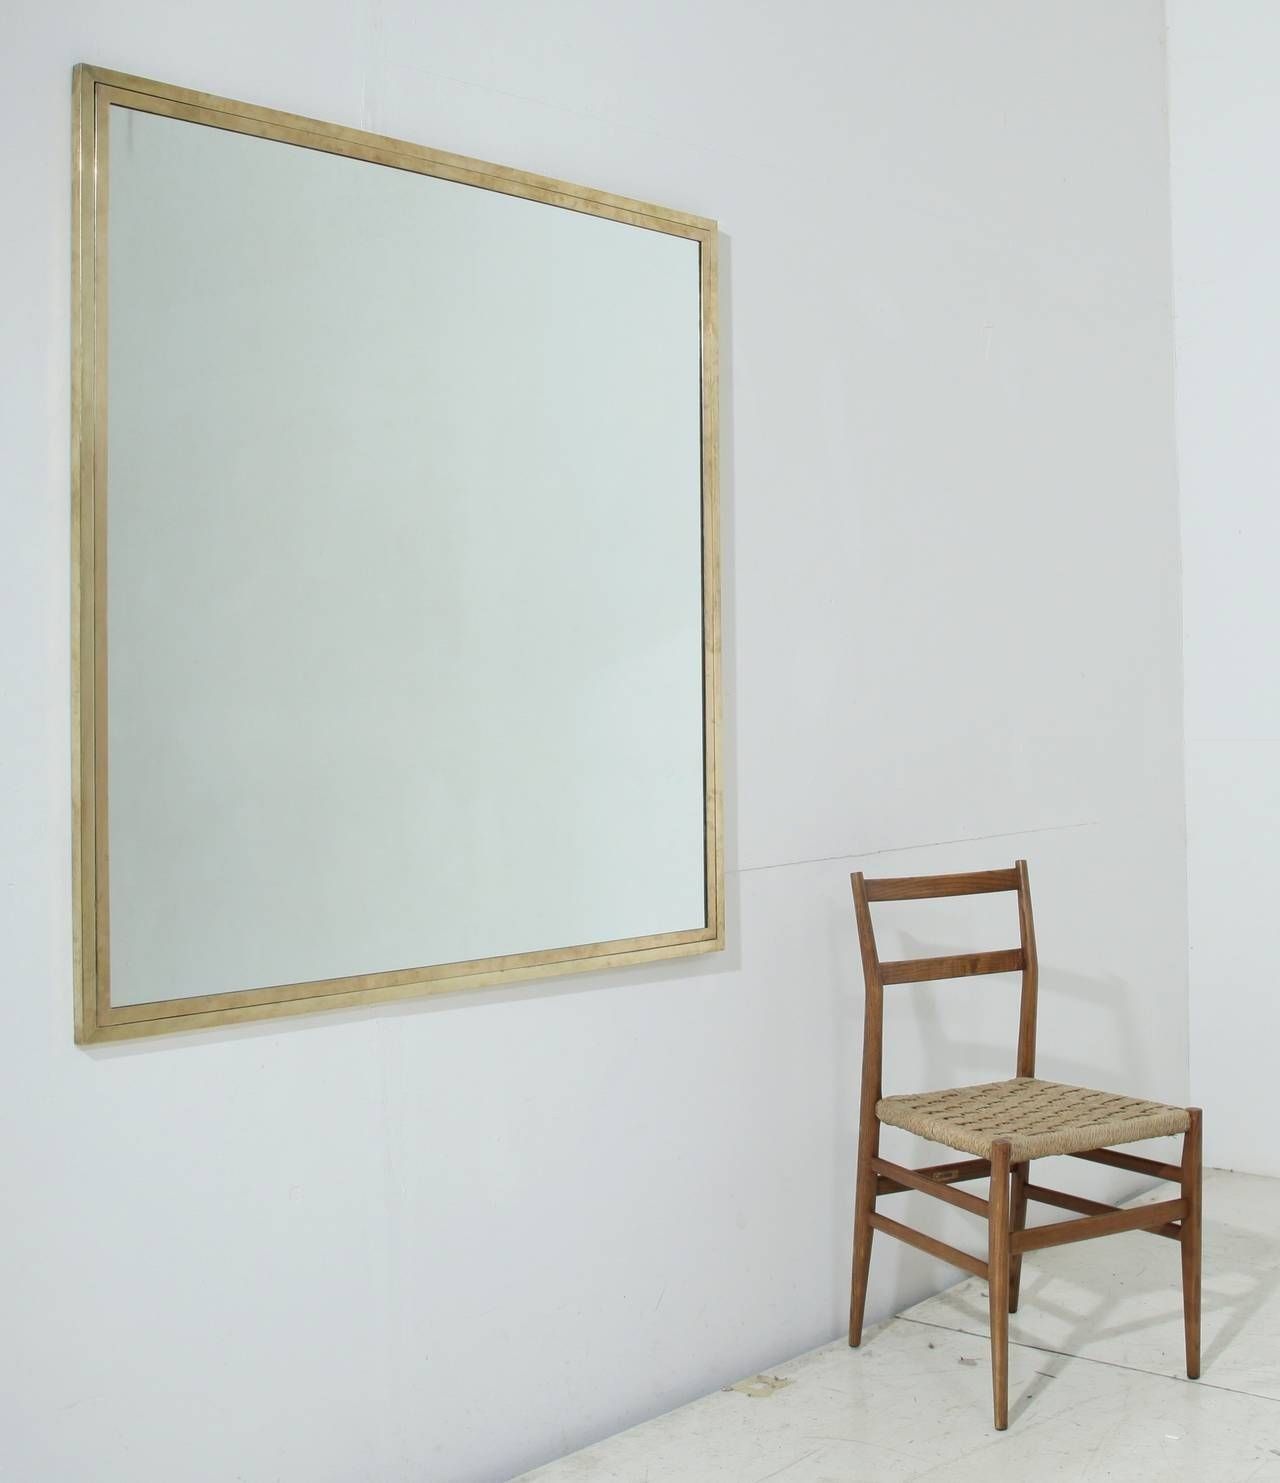 Home Decor: Home Decoration With Side Chair And Large Wall Mirror Regarding Large Square Mirrors (View 6 of 15)